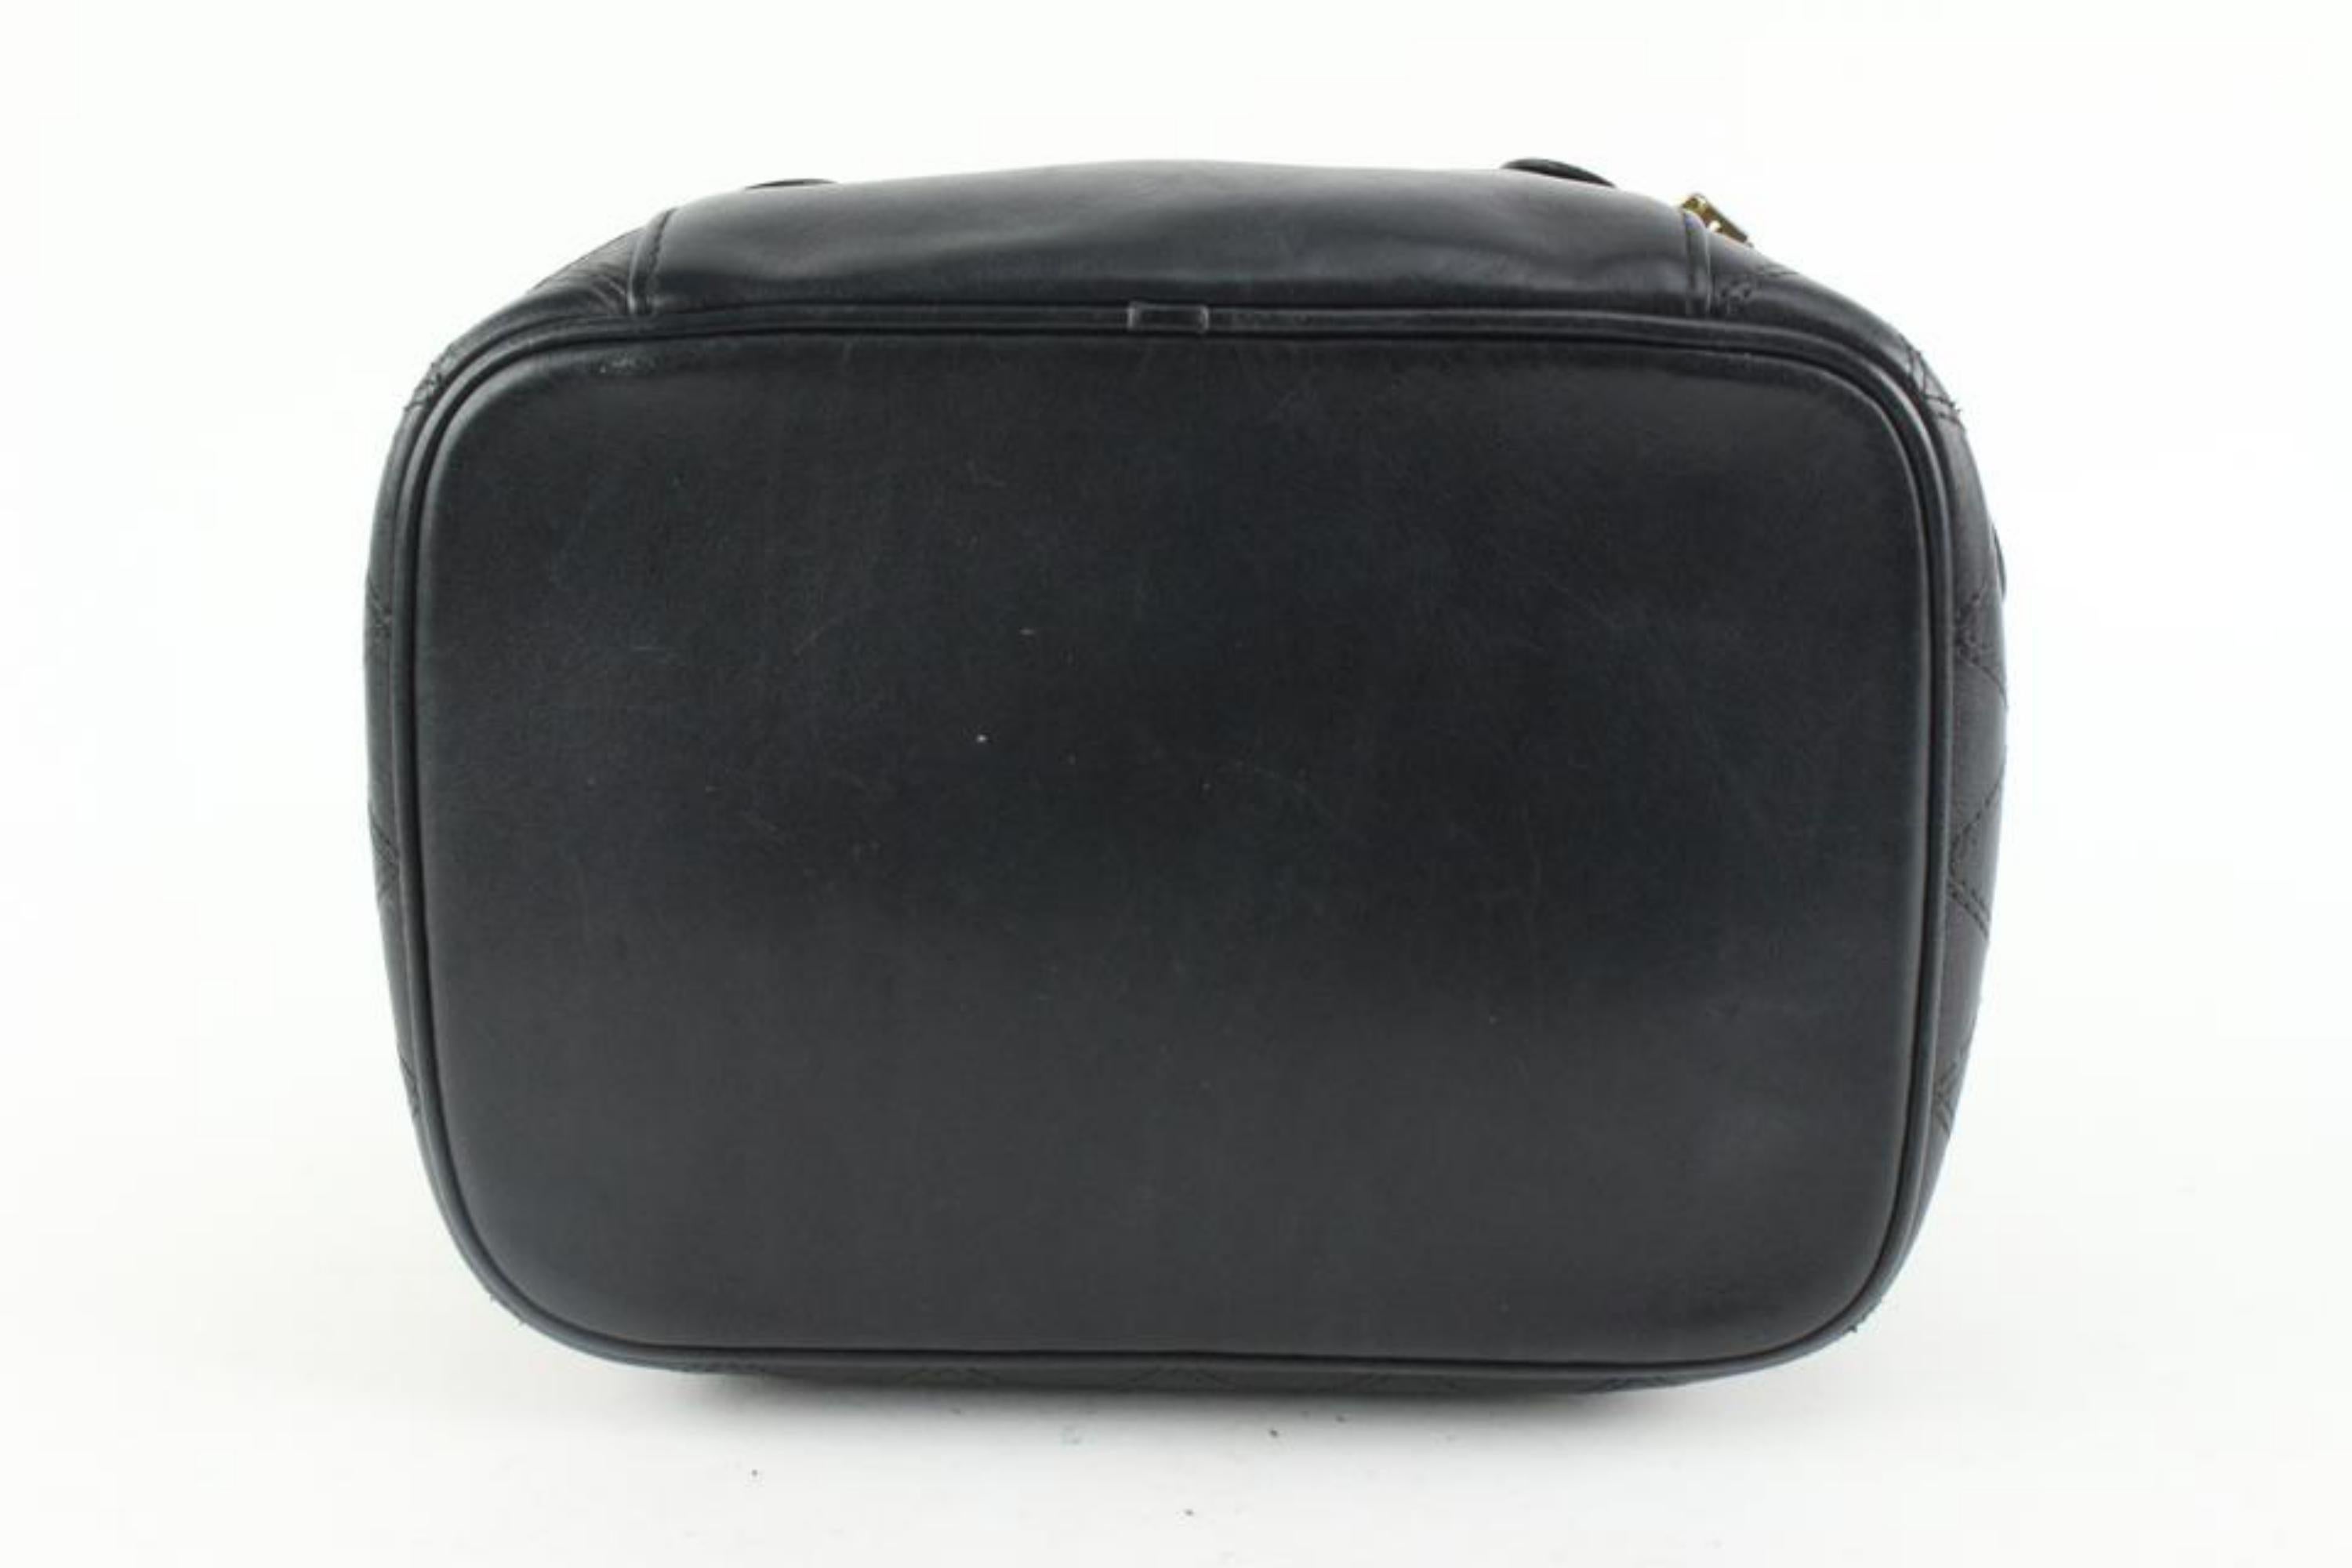 Chanel Black Quilted Lambskin Leather Vanity Case Make Up Pouch 1230c50 In Fair Condition For Sale In Dix hills, NY